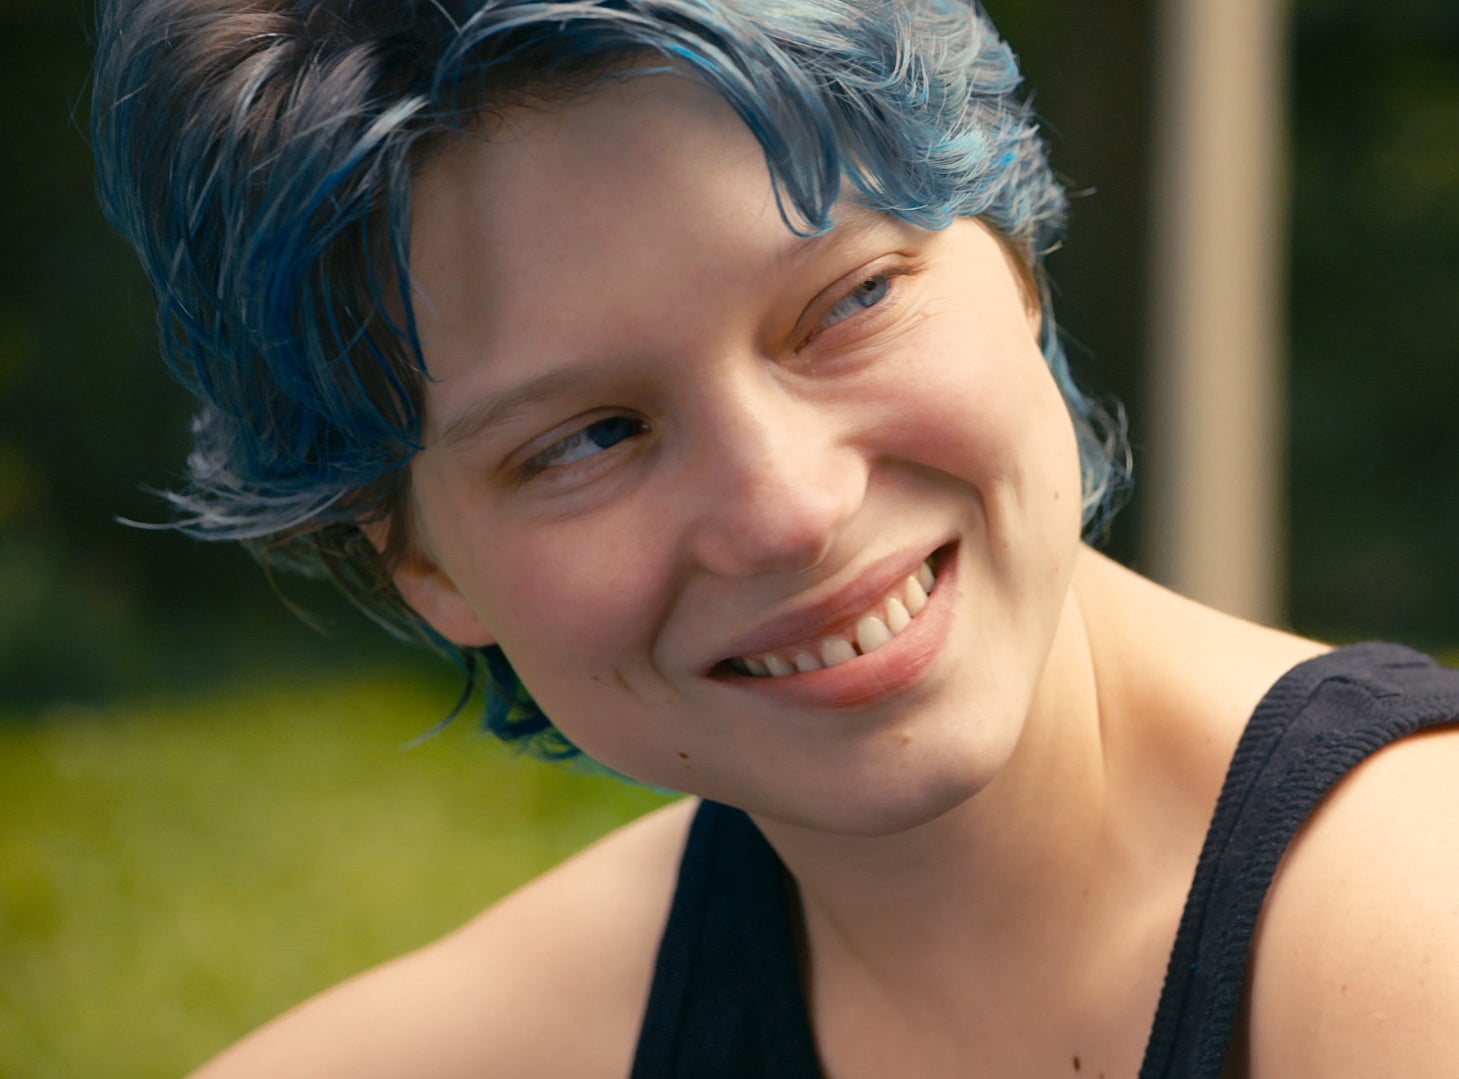 Léa Seydoux as Emma in Blue is the warmest color with short wavy blue hair and dark roots